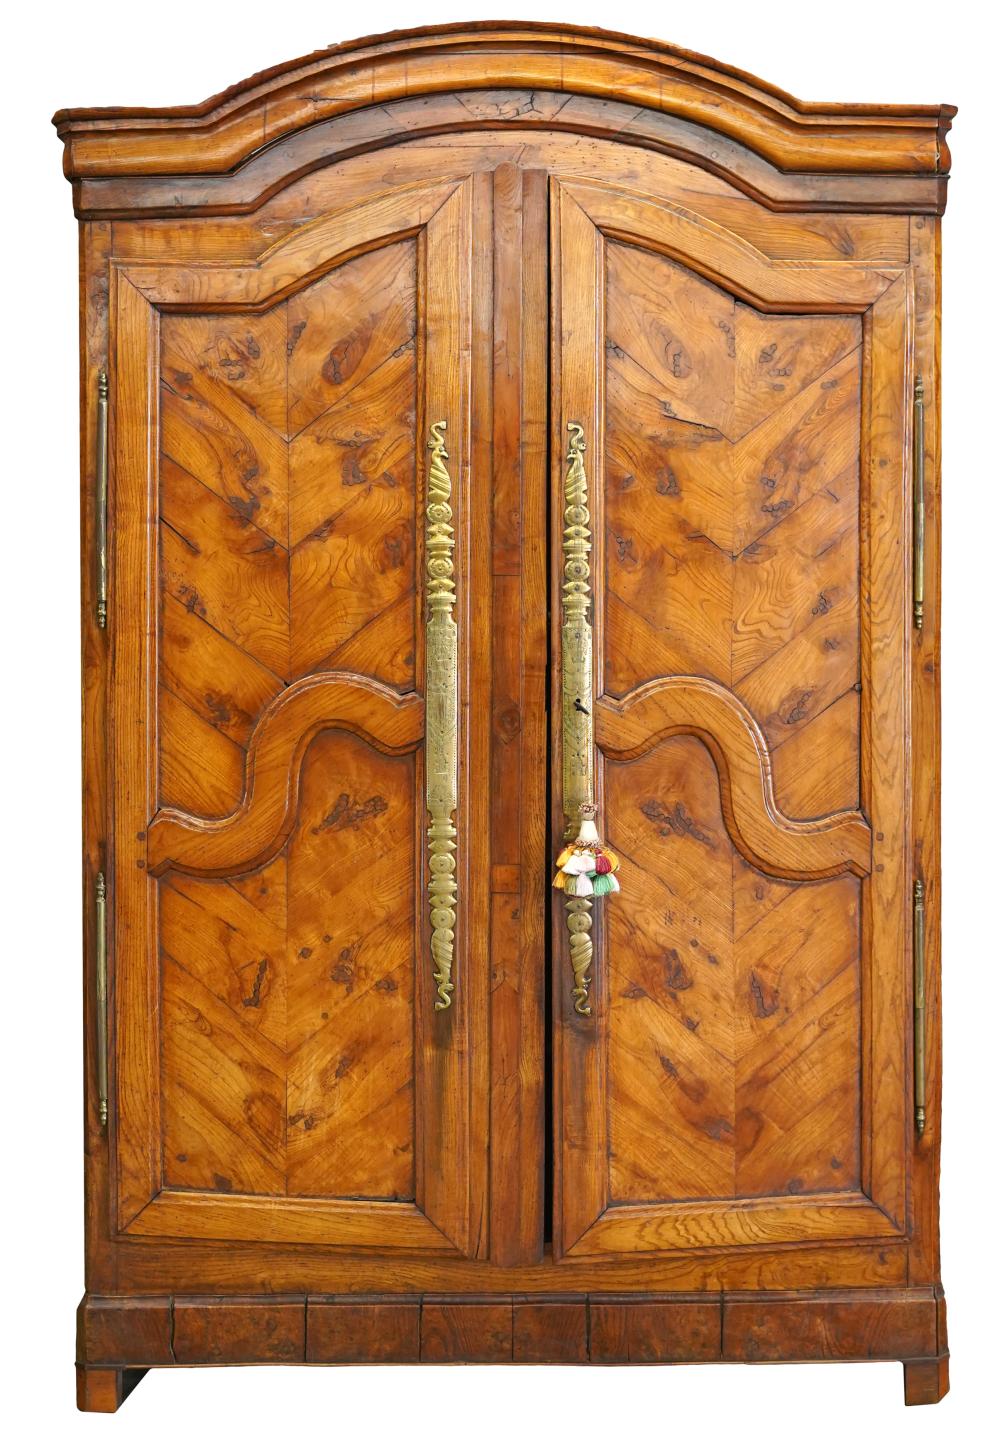 FRENCH PROVINCIAL ARMOIRE18th or early